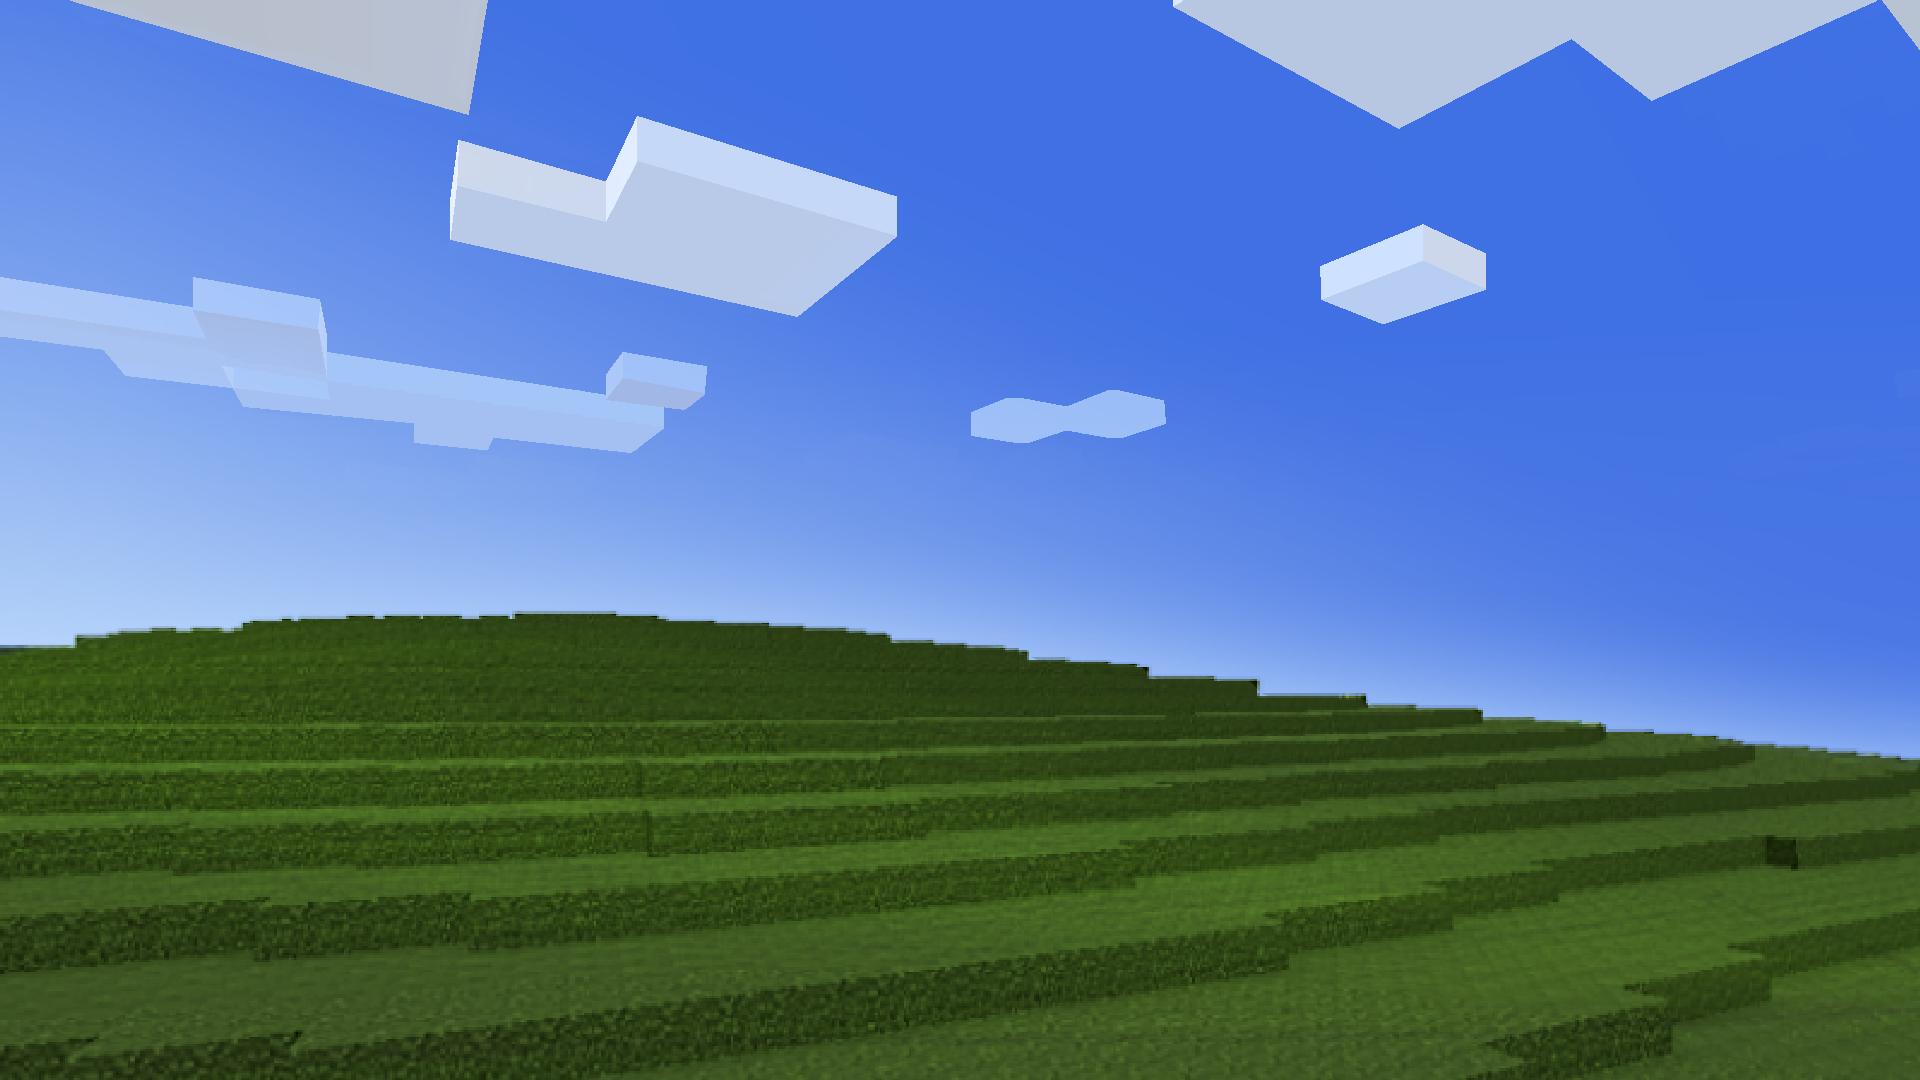 I Tried To Recreate The Windows Xp Background Bliss In